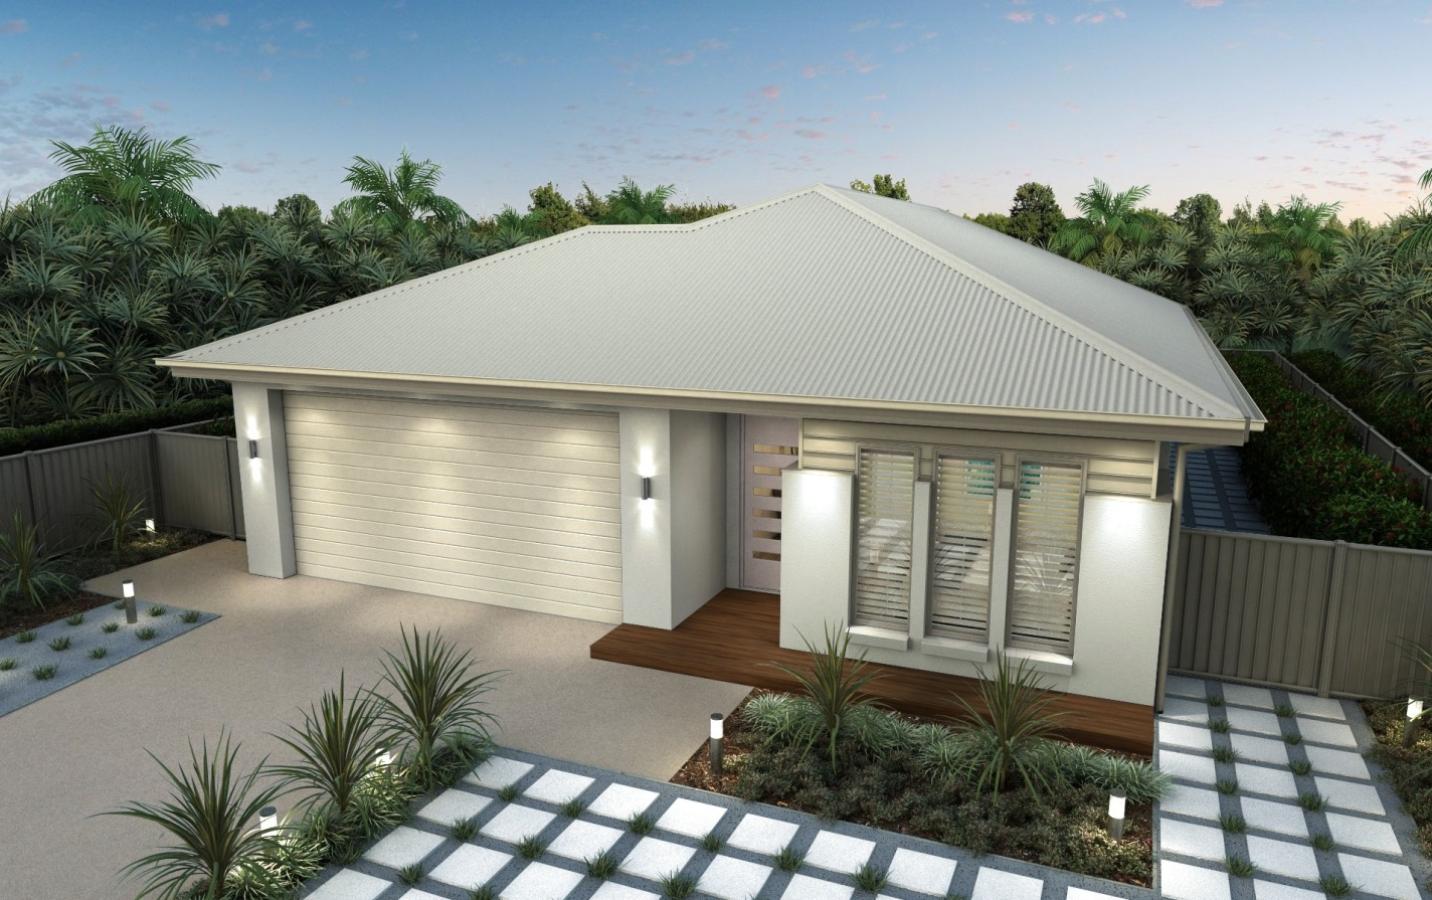 COLORBOND® steel Visualiser. Genesis. A compact single-level house with a prominent roofline.